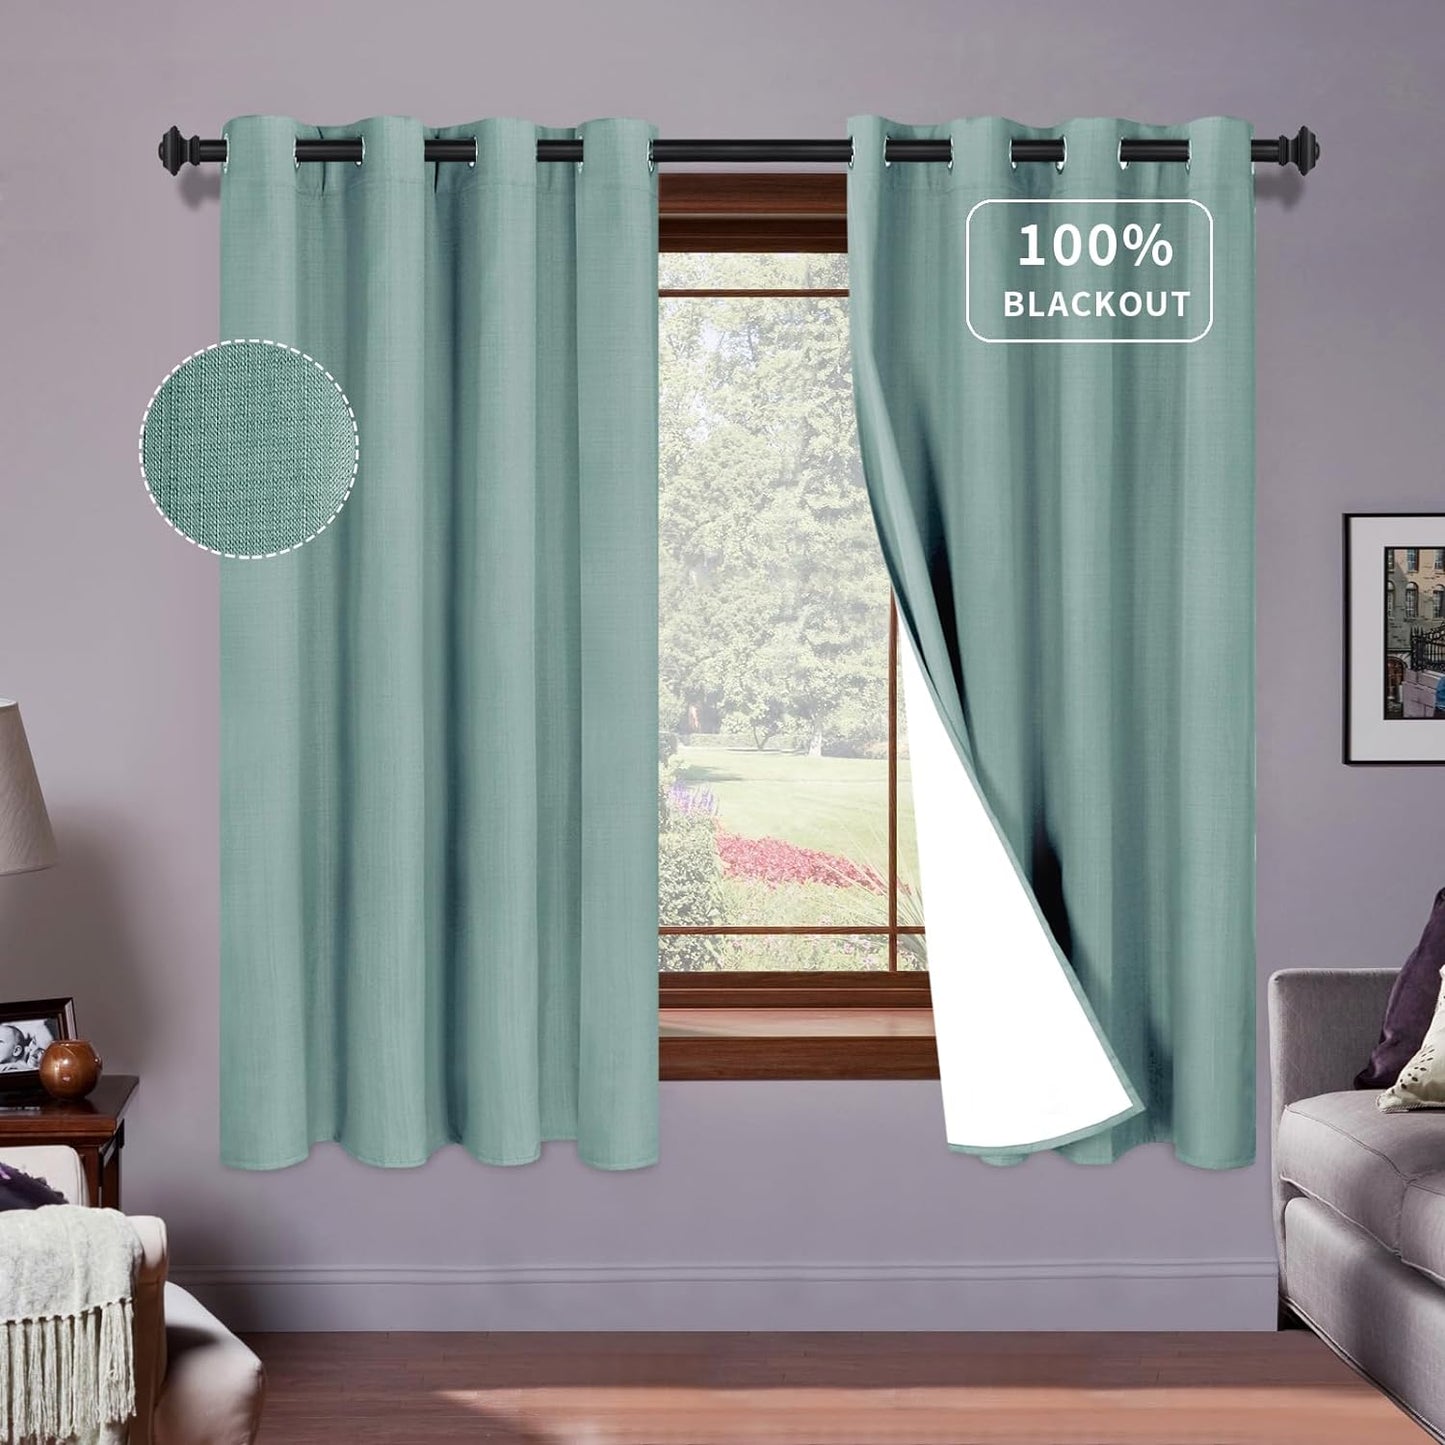 Purefit White Linen Blackout Curtains 84 Inches Long 100% Room Darkening Thermal Insulated Window Curtain Drapes for Bedroom Living Room Nursery with Anti-Rust Grommets & Energy Saving Liner, 2 Panels  PureFit Dusk Blue 52"W X 63"L 